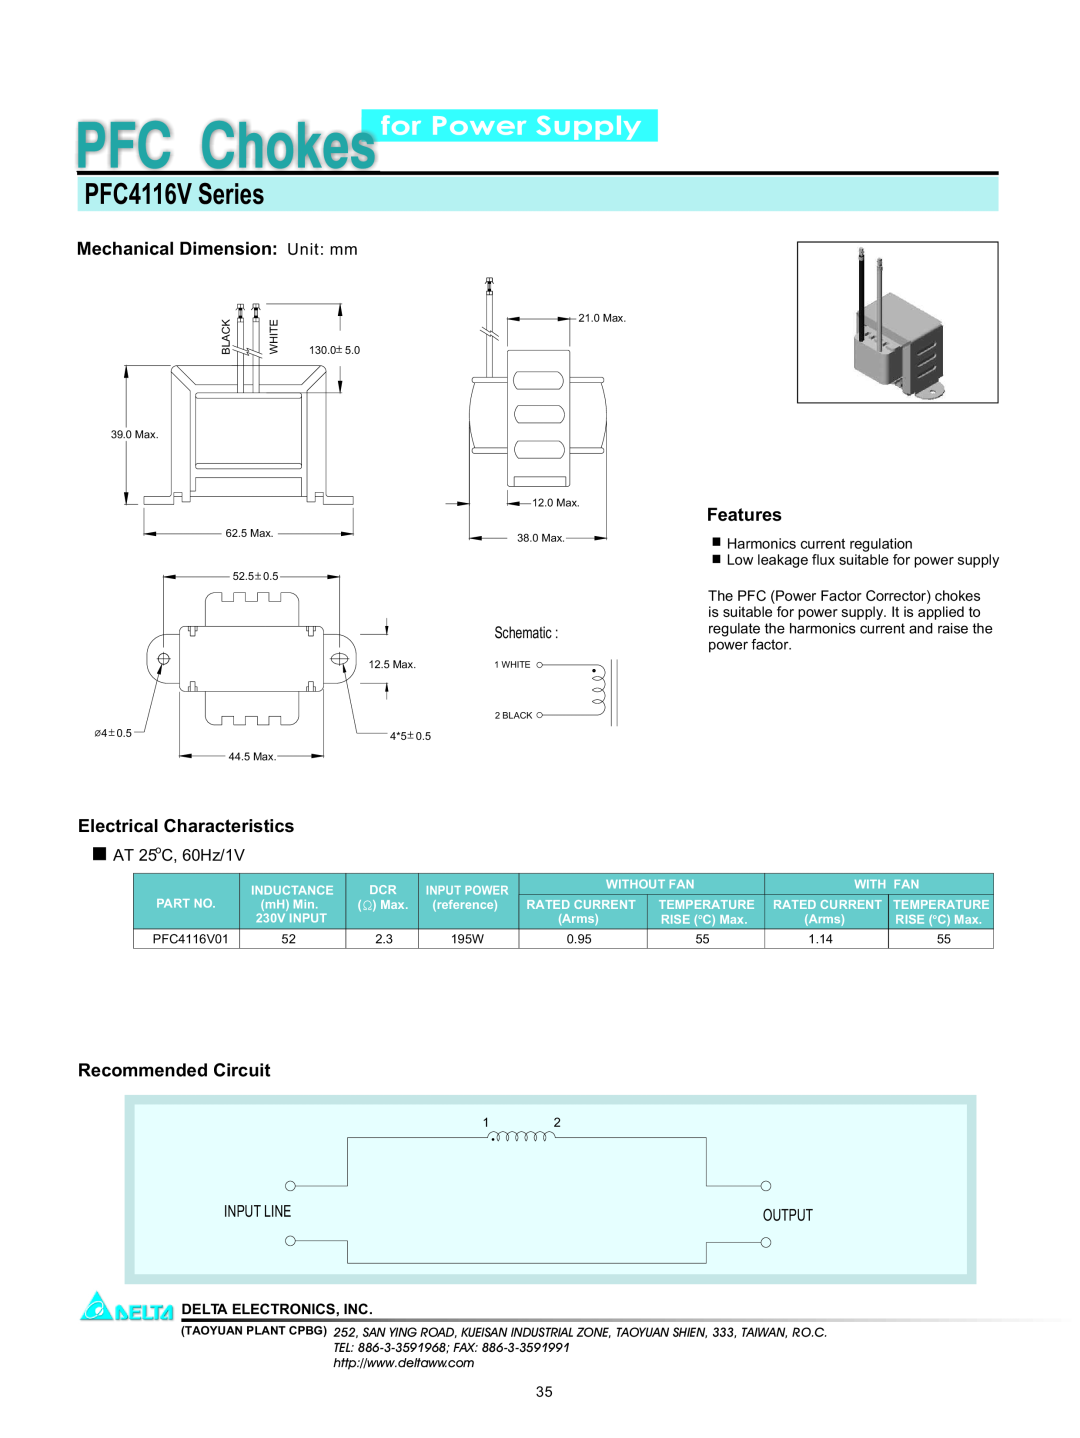 Delta Electronics PFC4116V Series manual for Power Supply, Mechanical Dimension Unit mm, Features, Recommended Circuit 